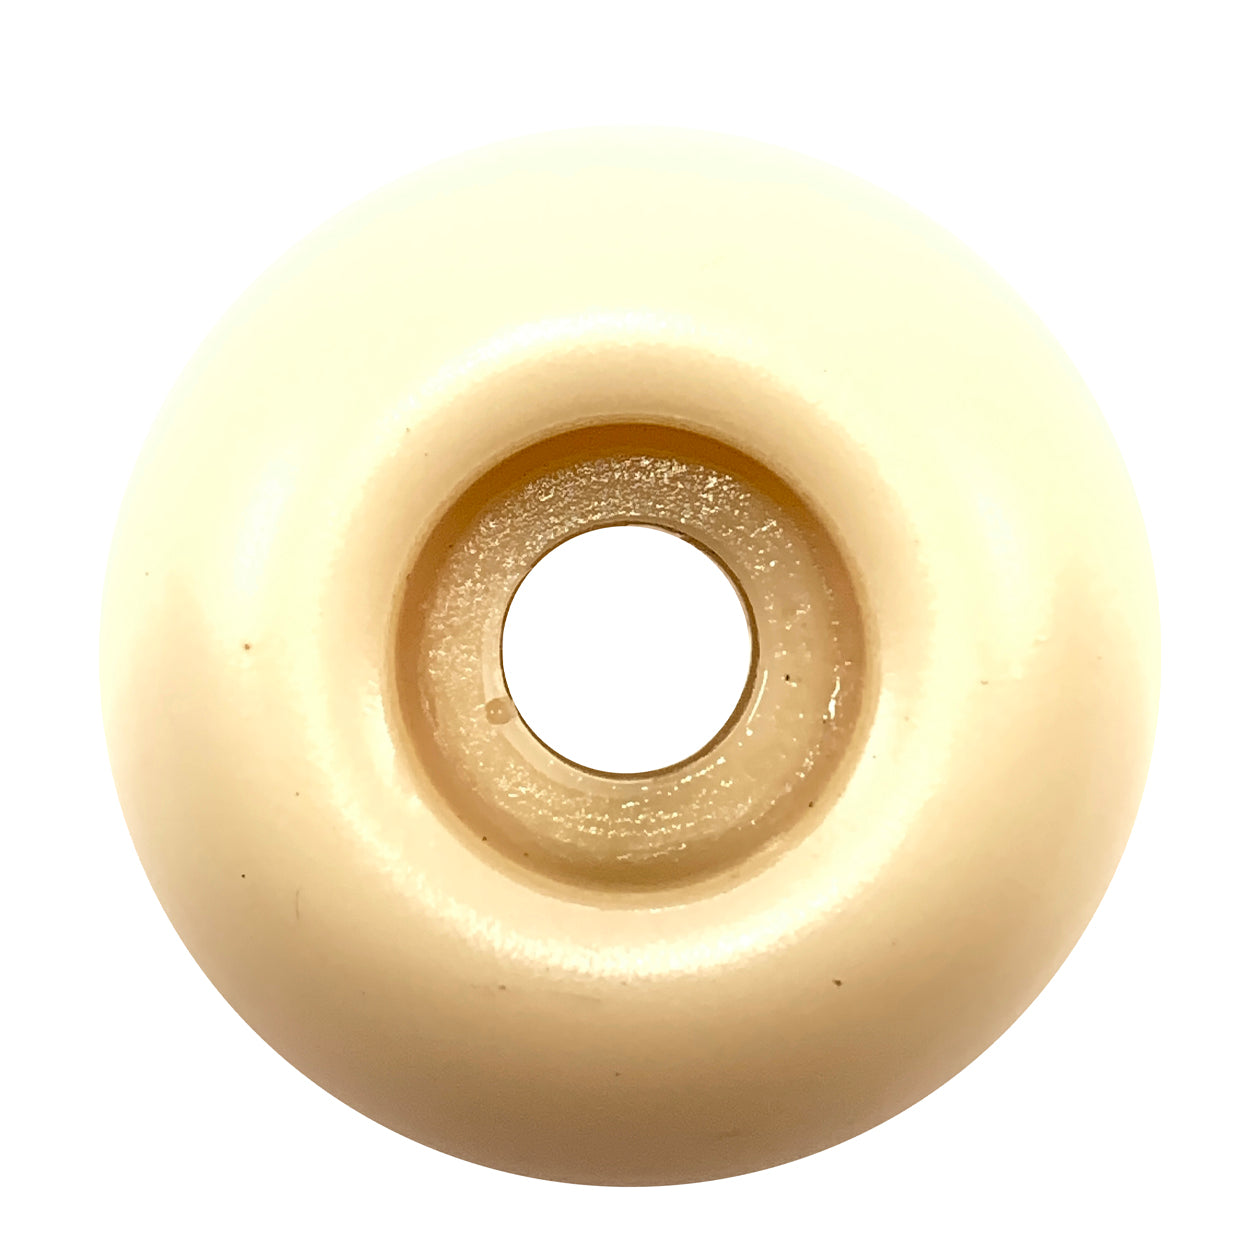 Spitfire - 50mm - 99a Formula Four Wheels Lil Smokies Classic - Prime Delux Store